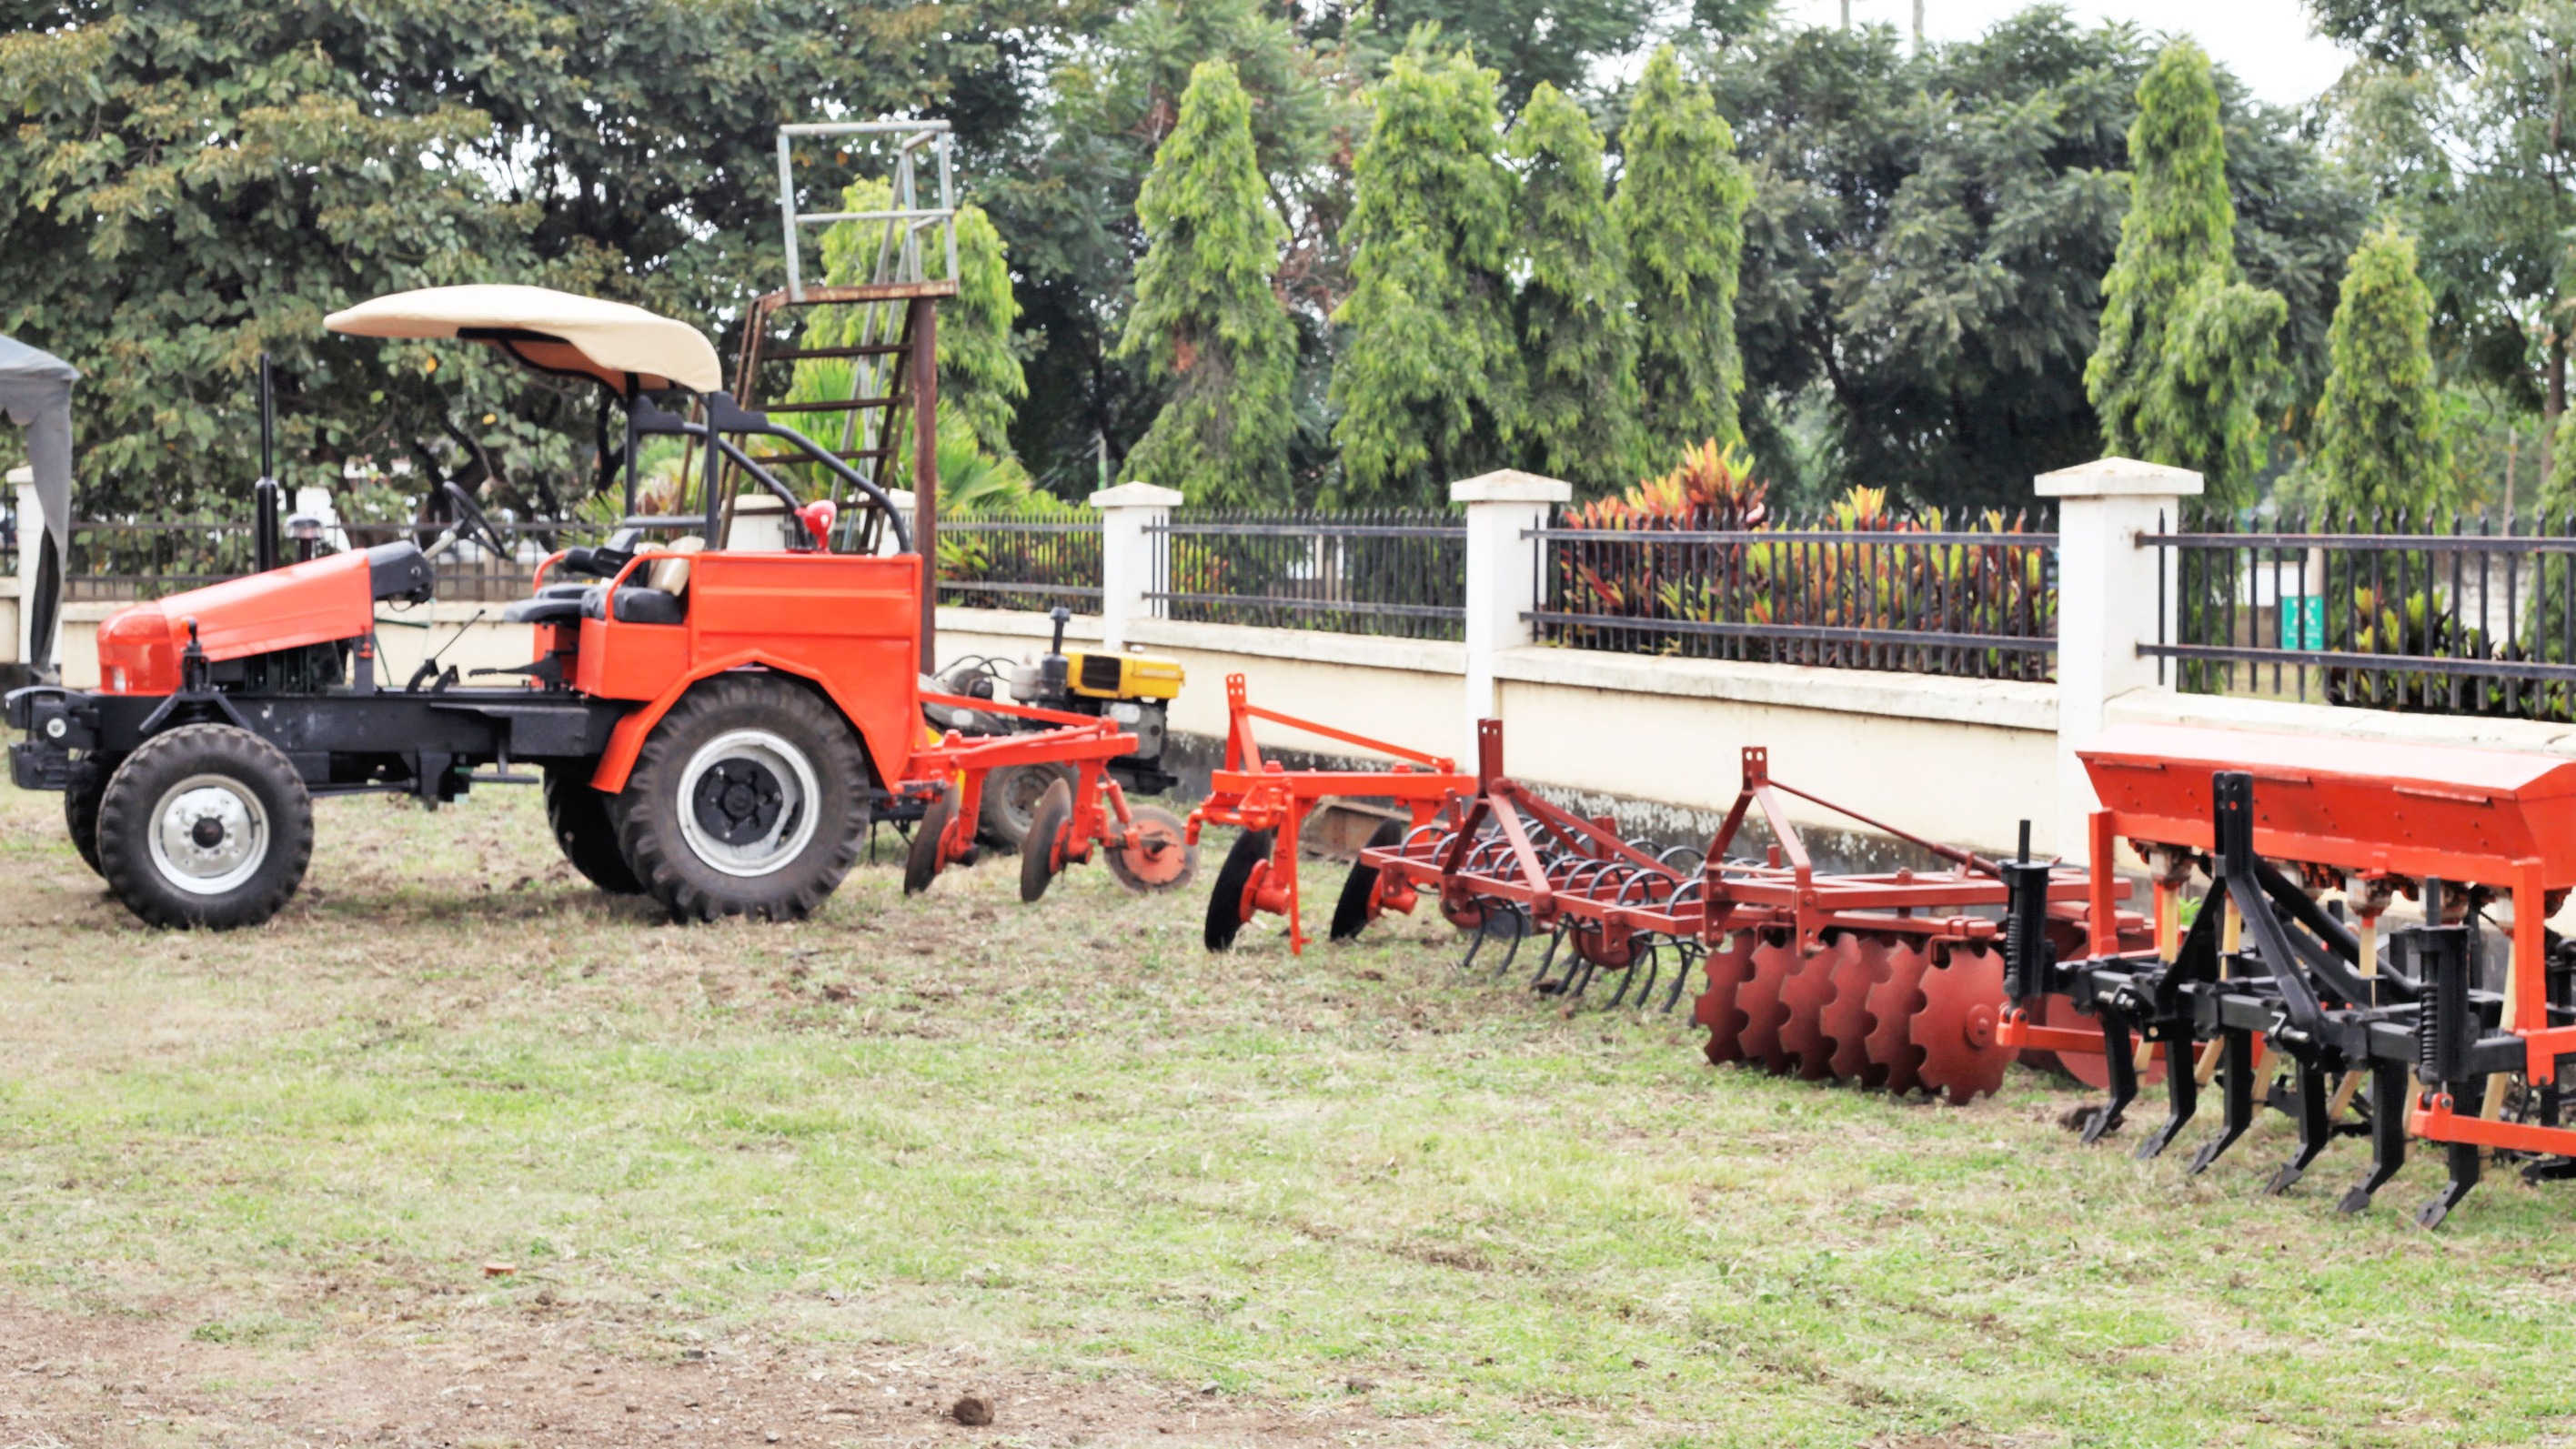 Centre for Agricultural Mechanization and Rural Technology